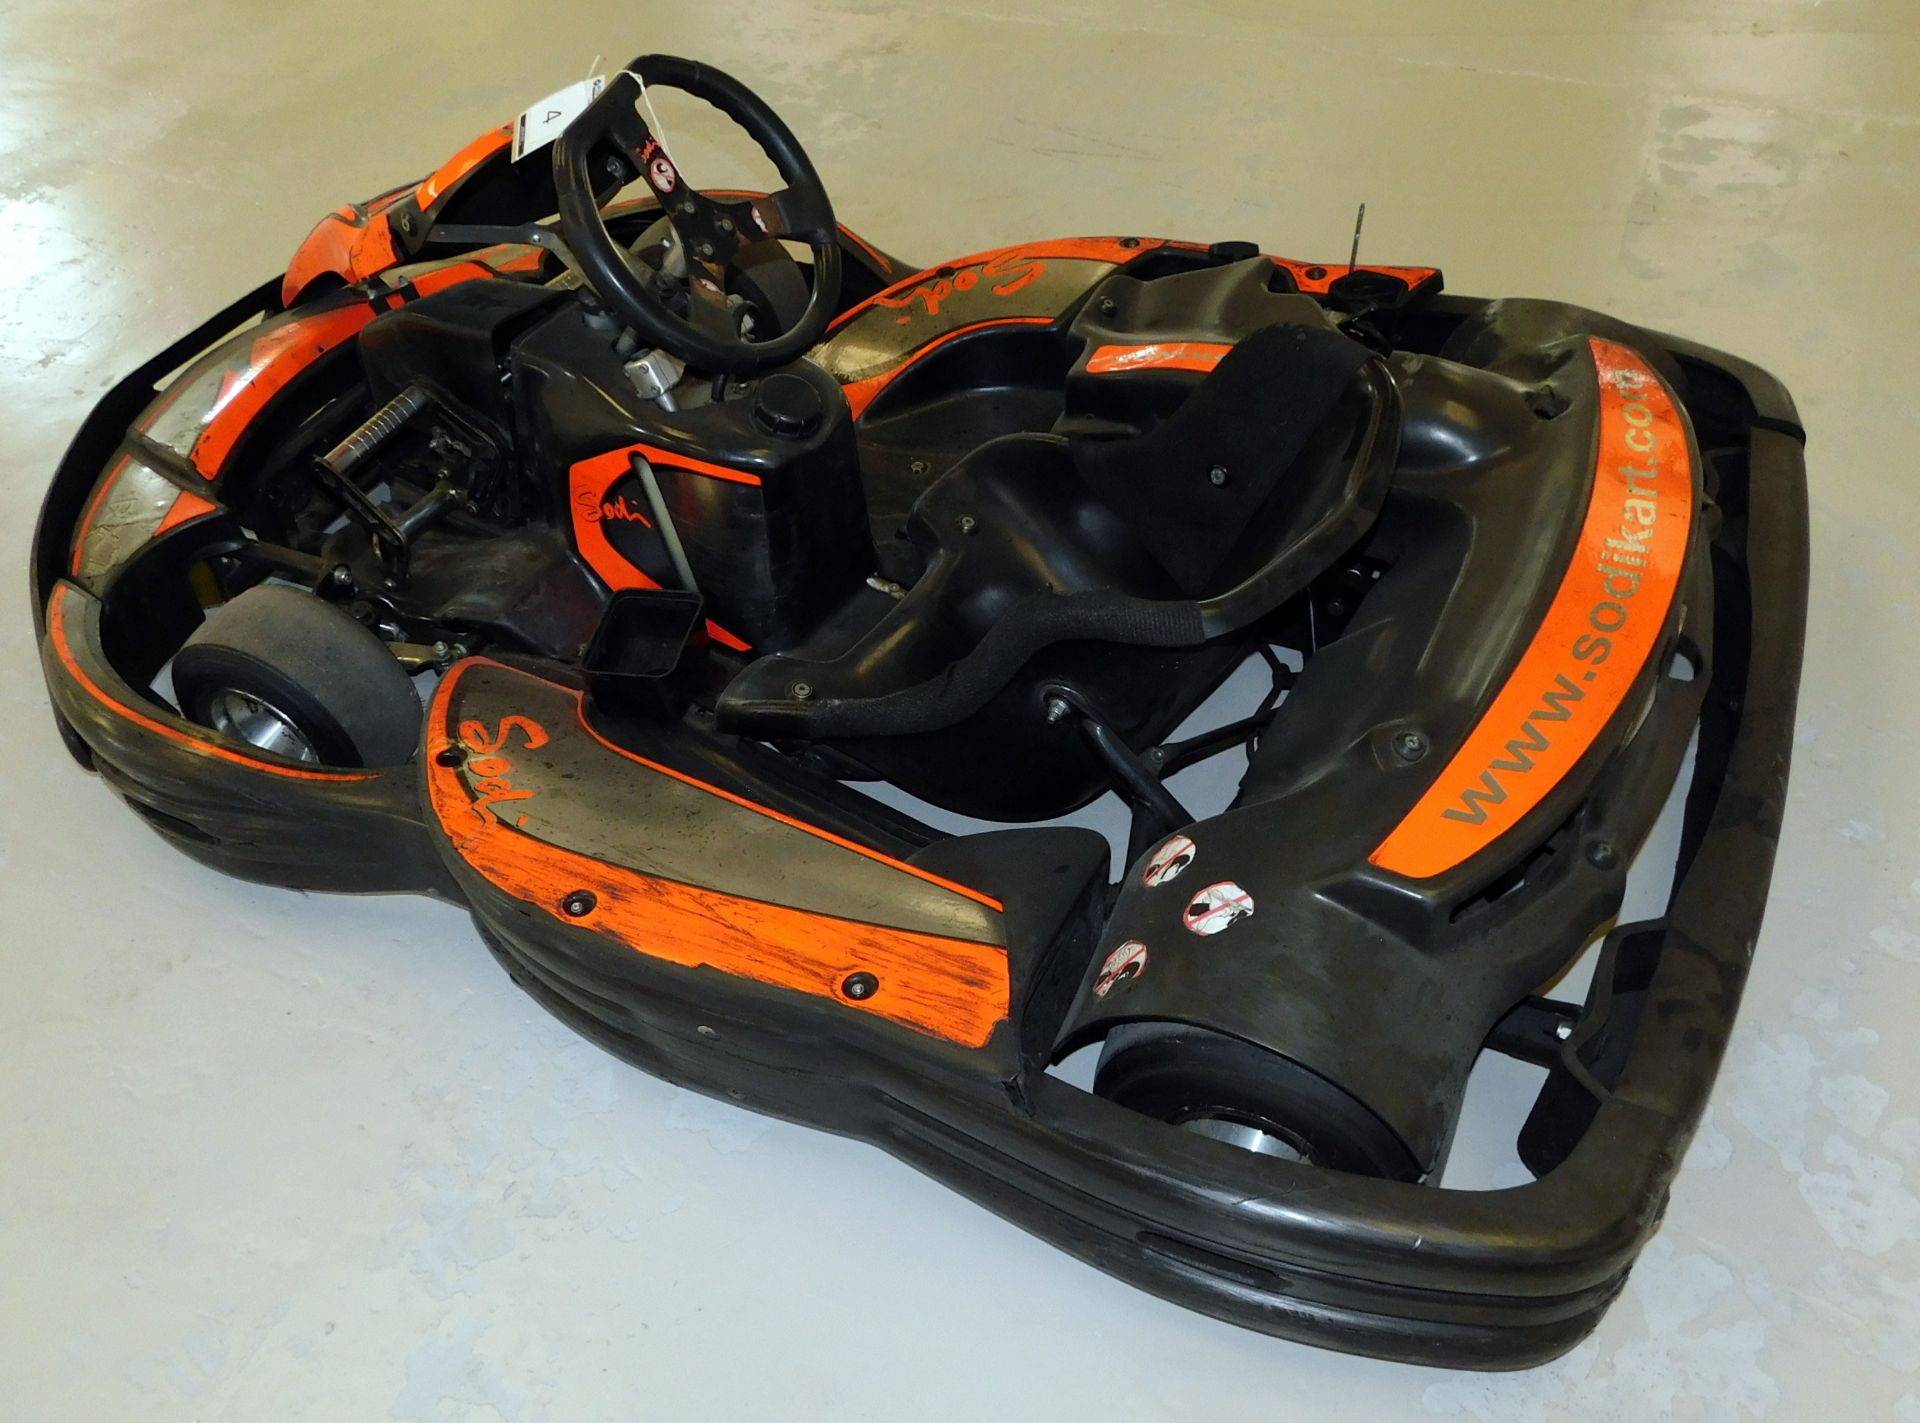 Sodi RX7 Petrol Powered Go-Kart with Honda 5.5 GX160 Engine (located in Bredbury, collection - Image 3 of 5